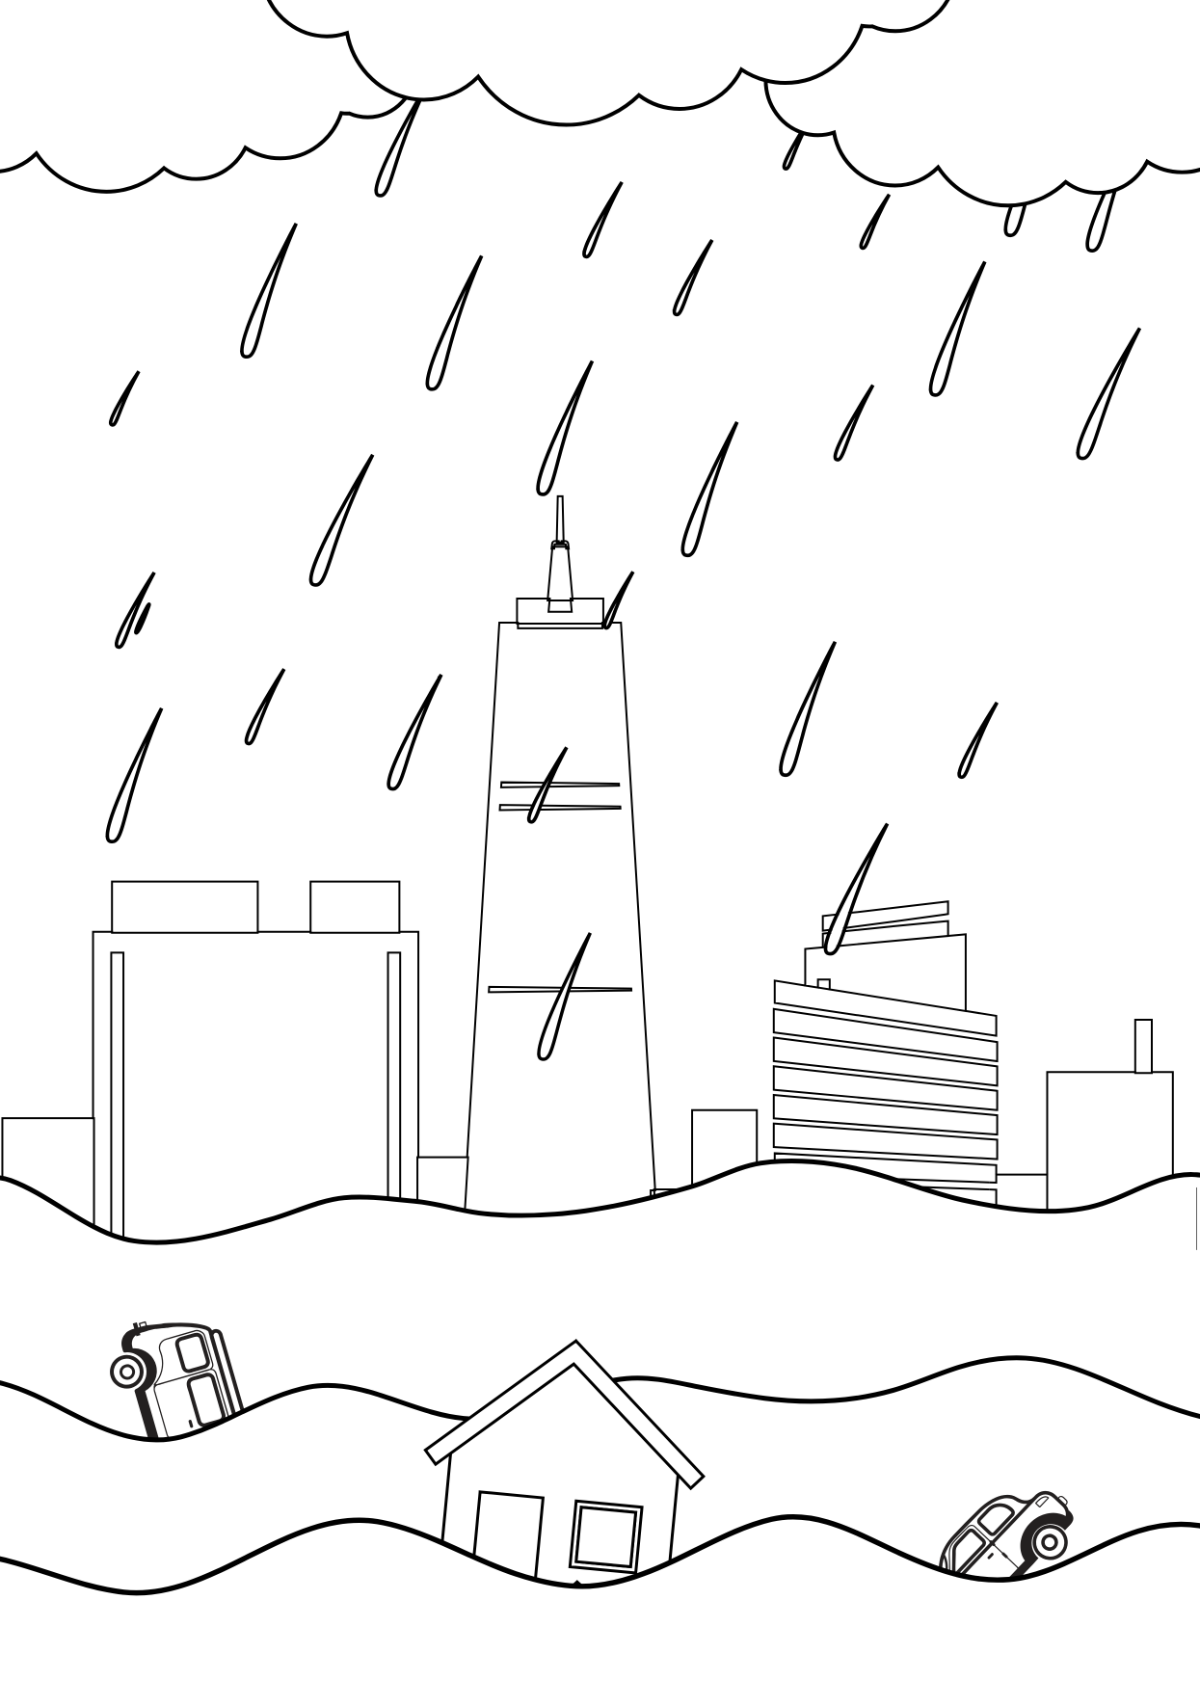 Free Flood Drawing Template